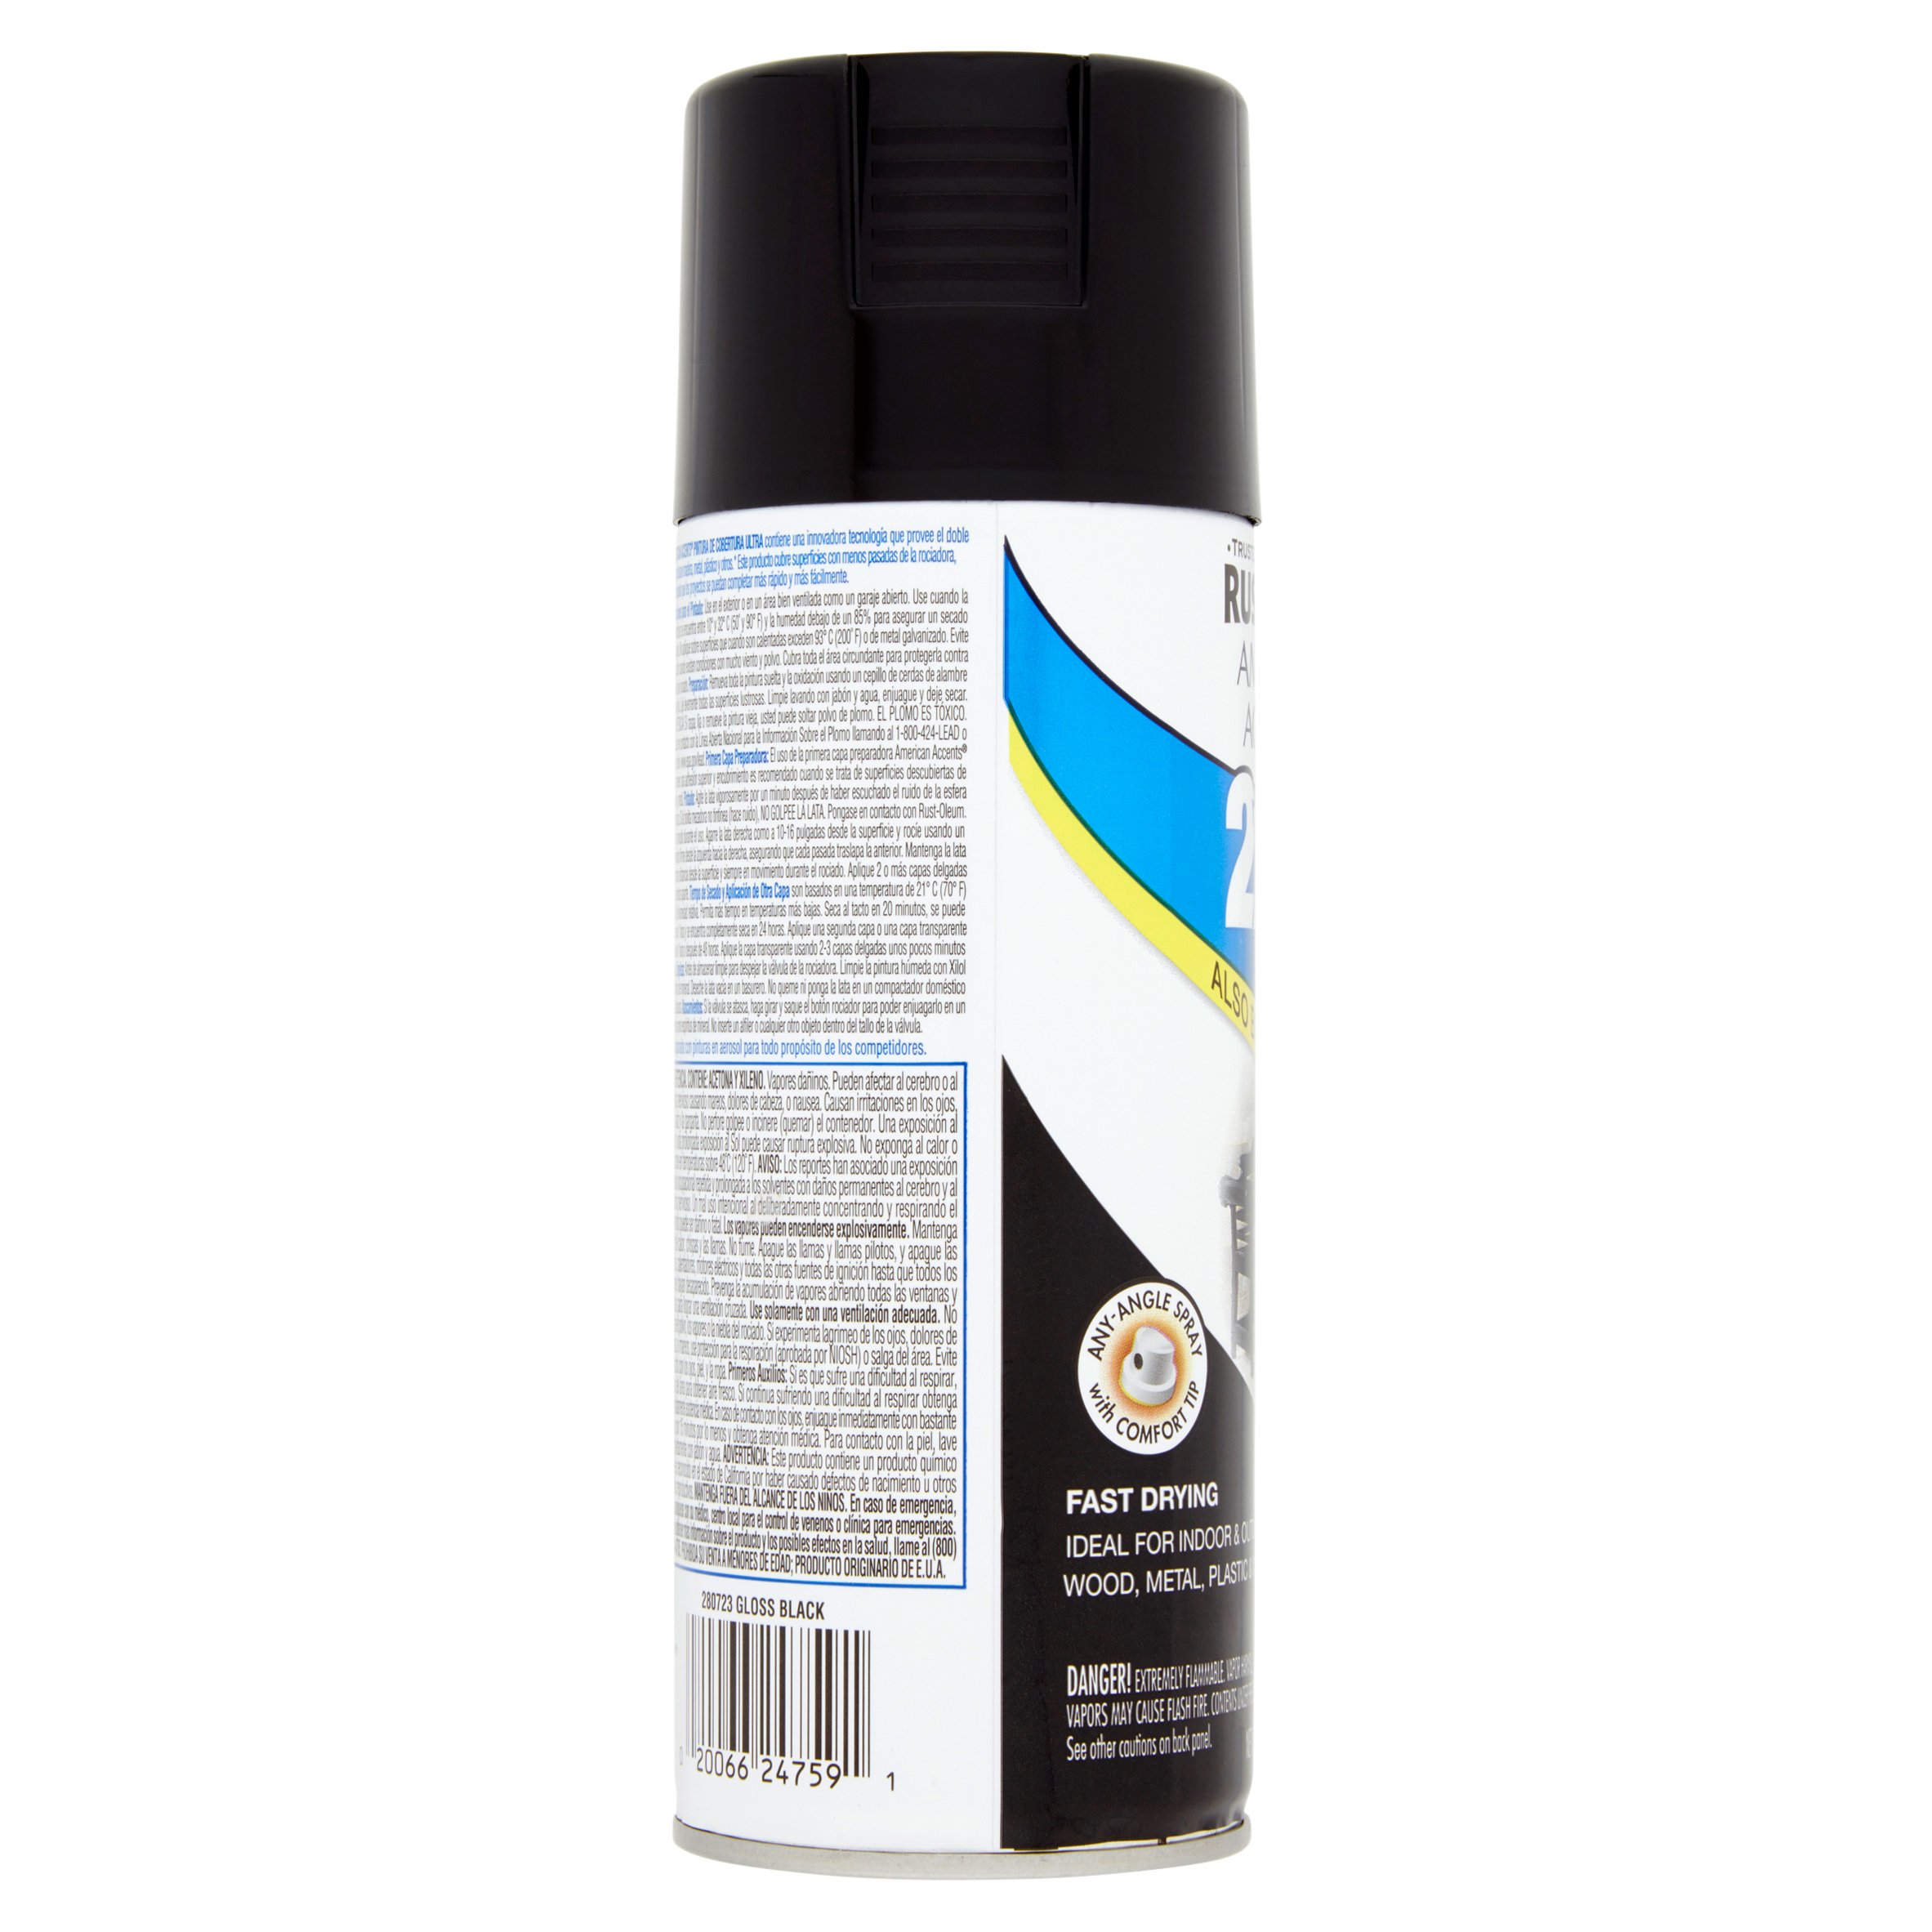 Rust-Oleum American Accents Ultra Cover 2X Gloss Black Spray Paint and Primer in 1, 12 oz - image 4 of 5